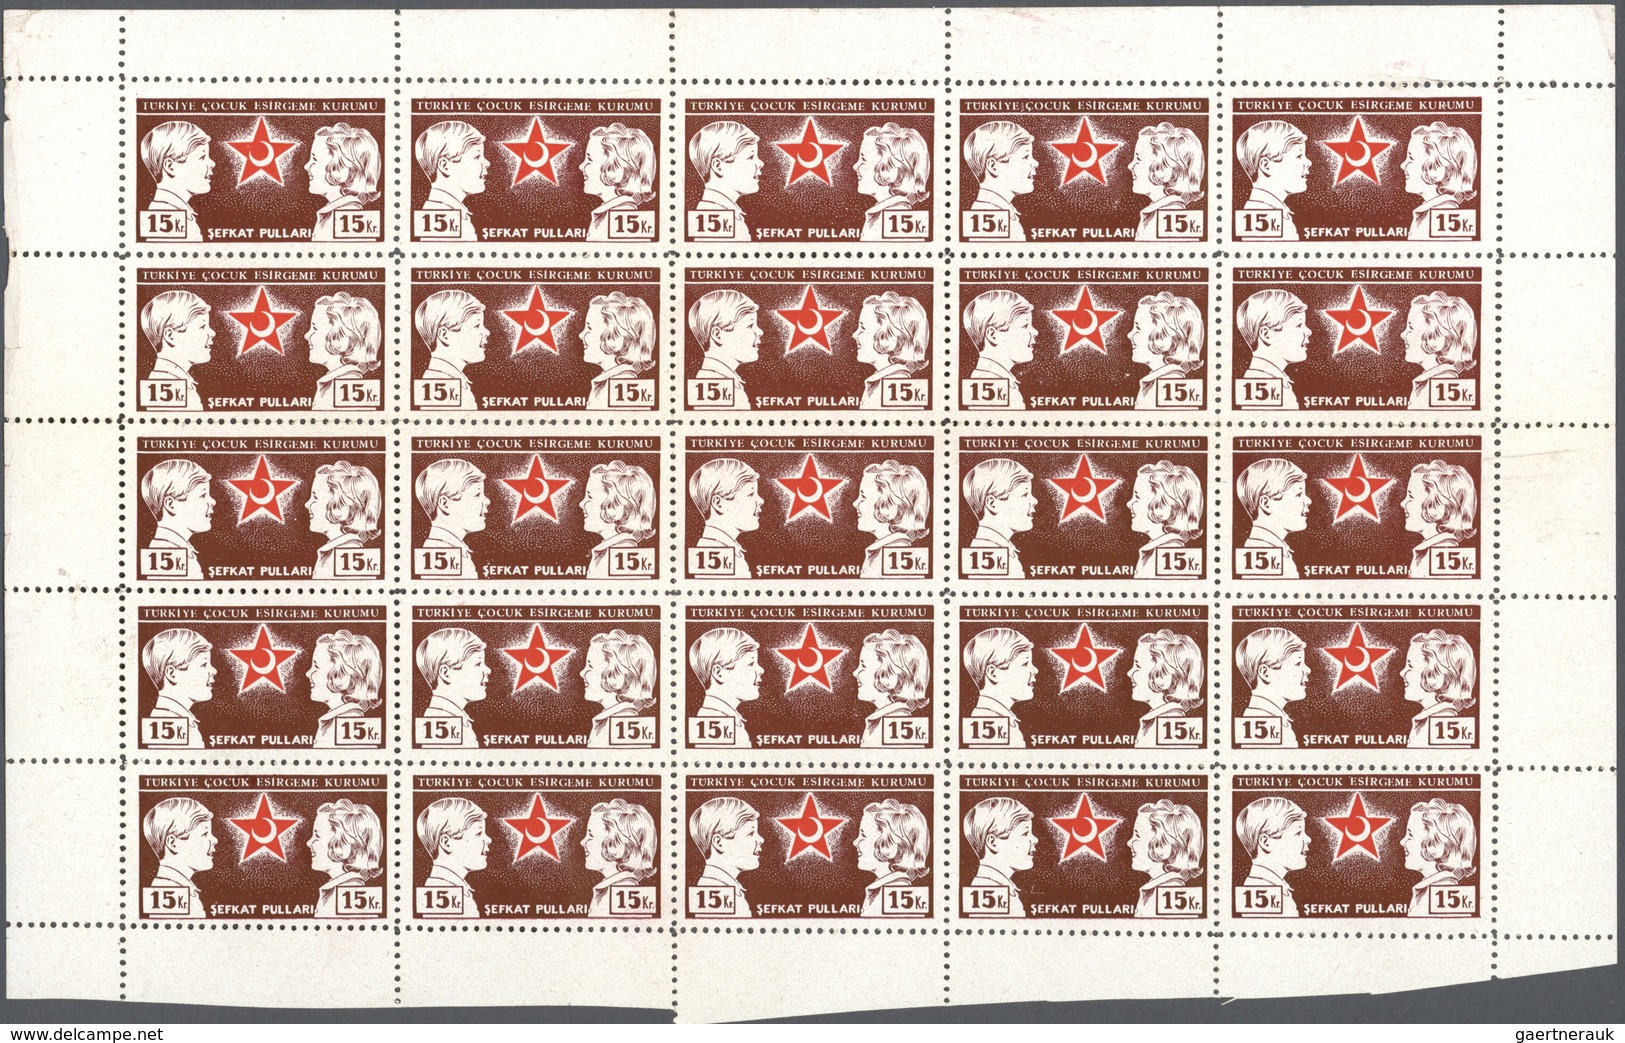 11251 Thematik: Rotes Kreuz / red cross: 1942, set of nine values in mint never hinged sheets of 25 with m